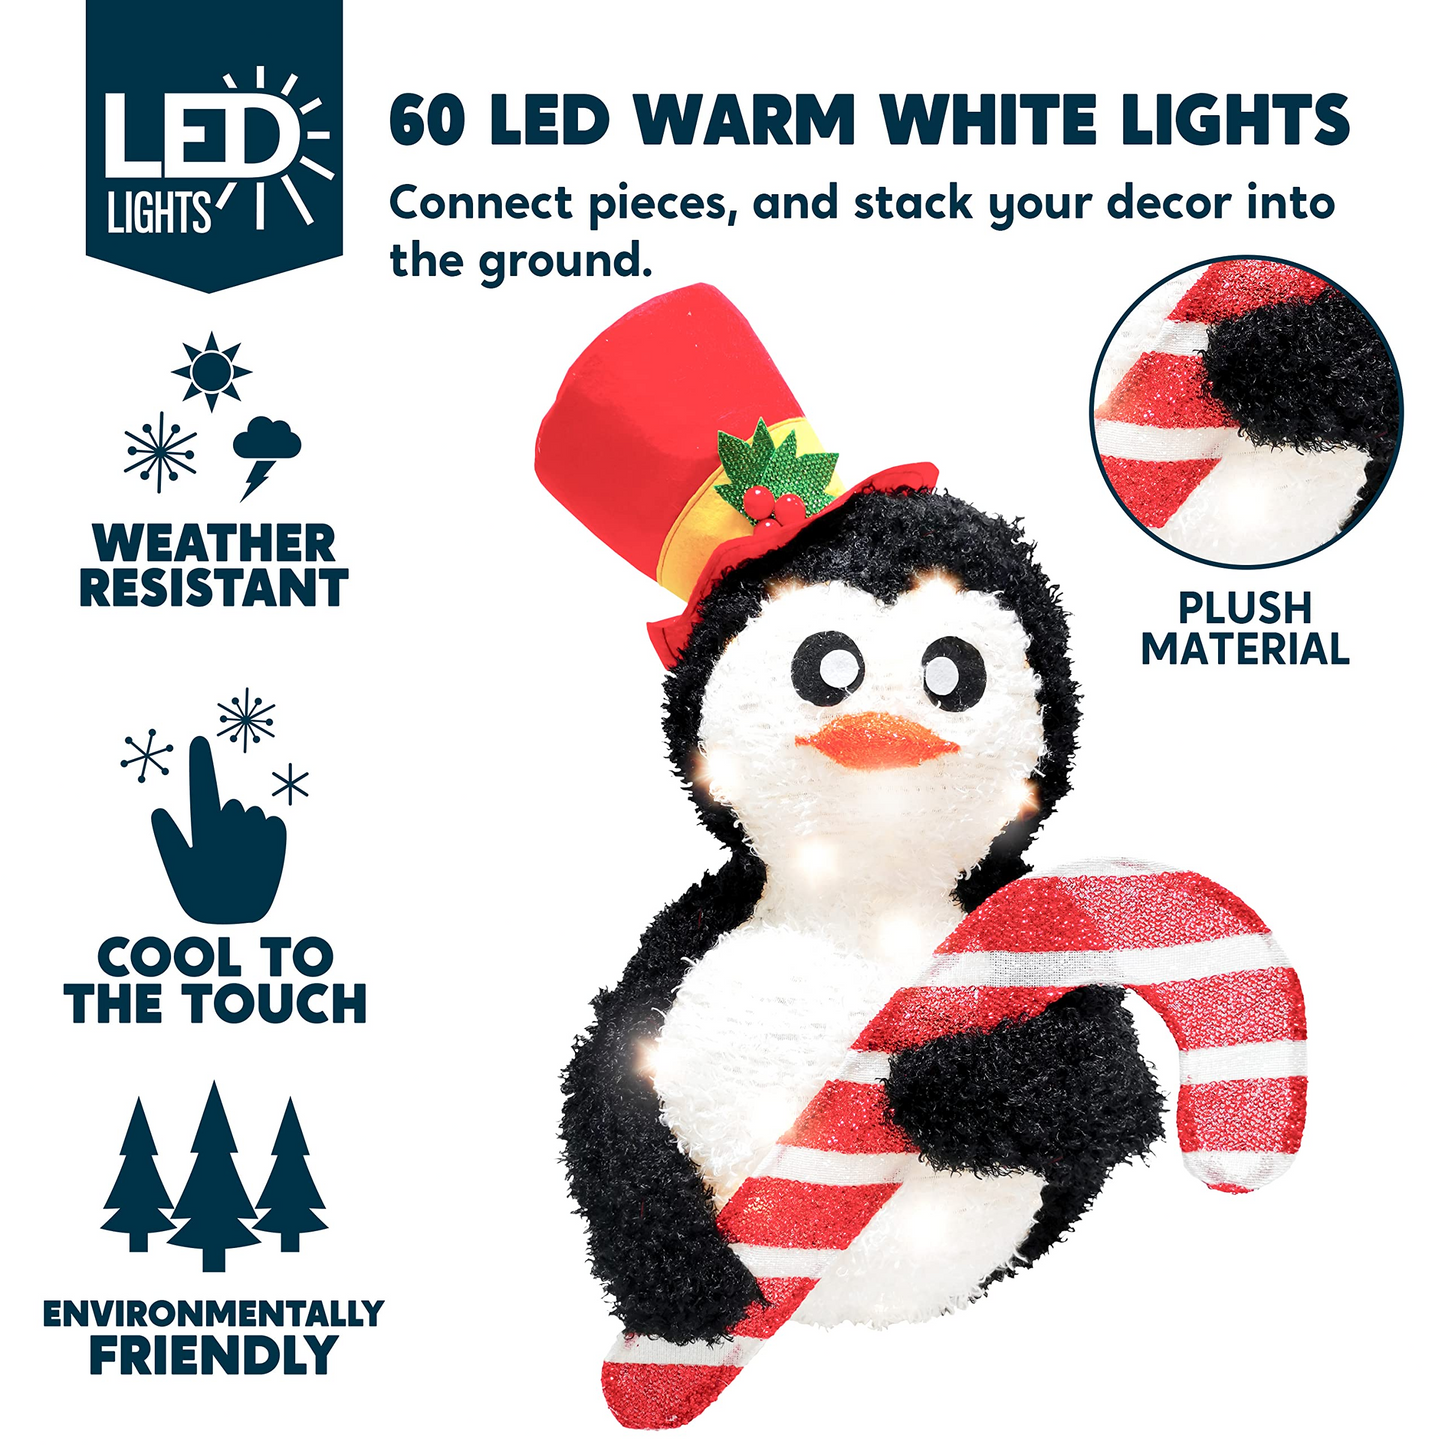 22in LED Yard Lights - Collapsible Penguin